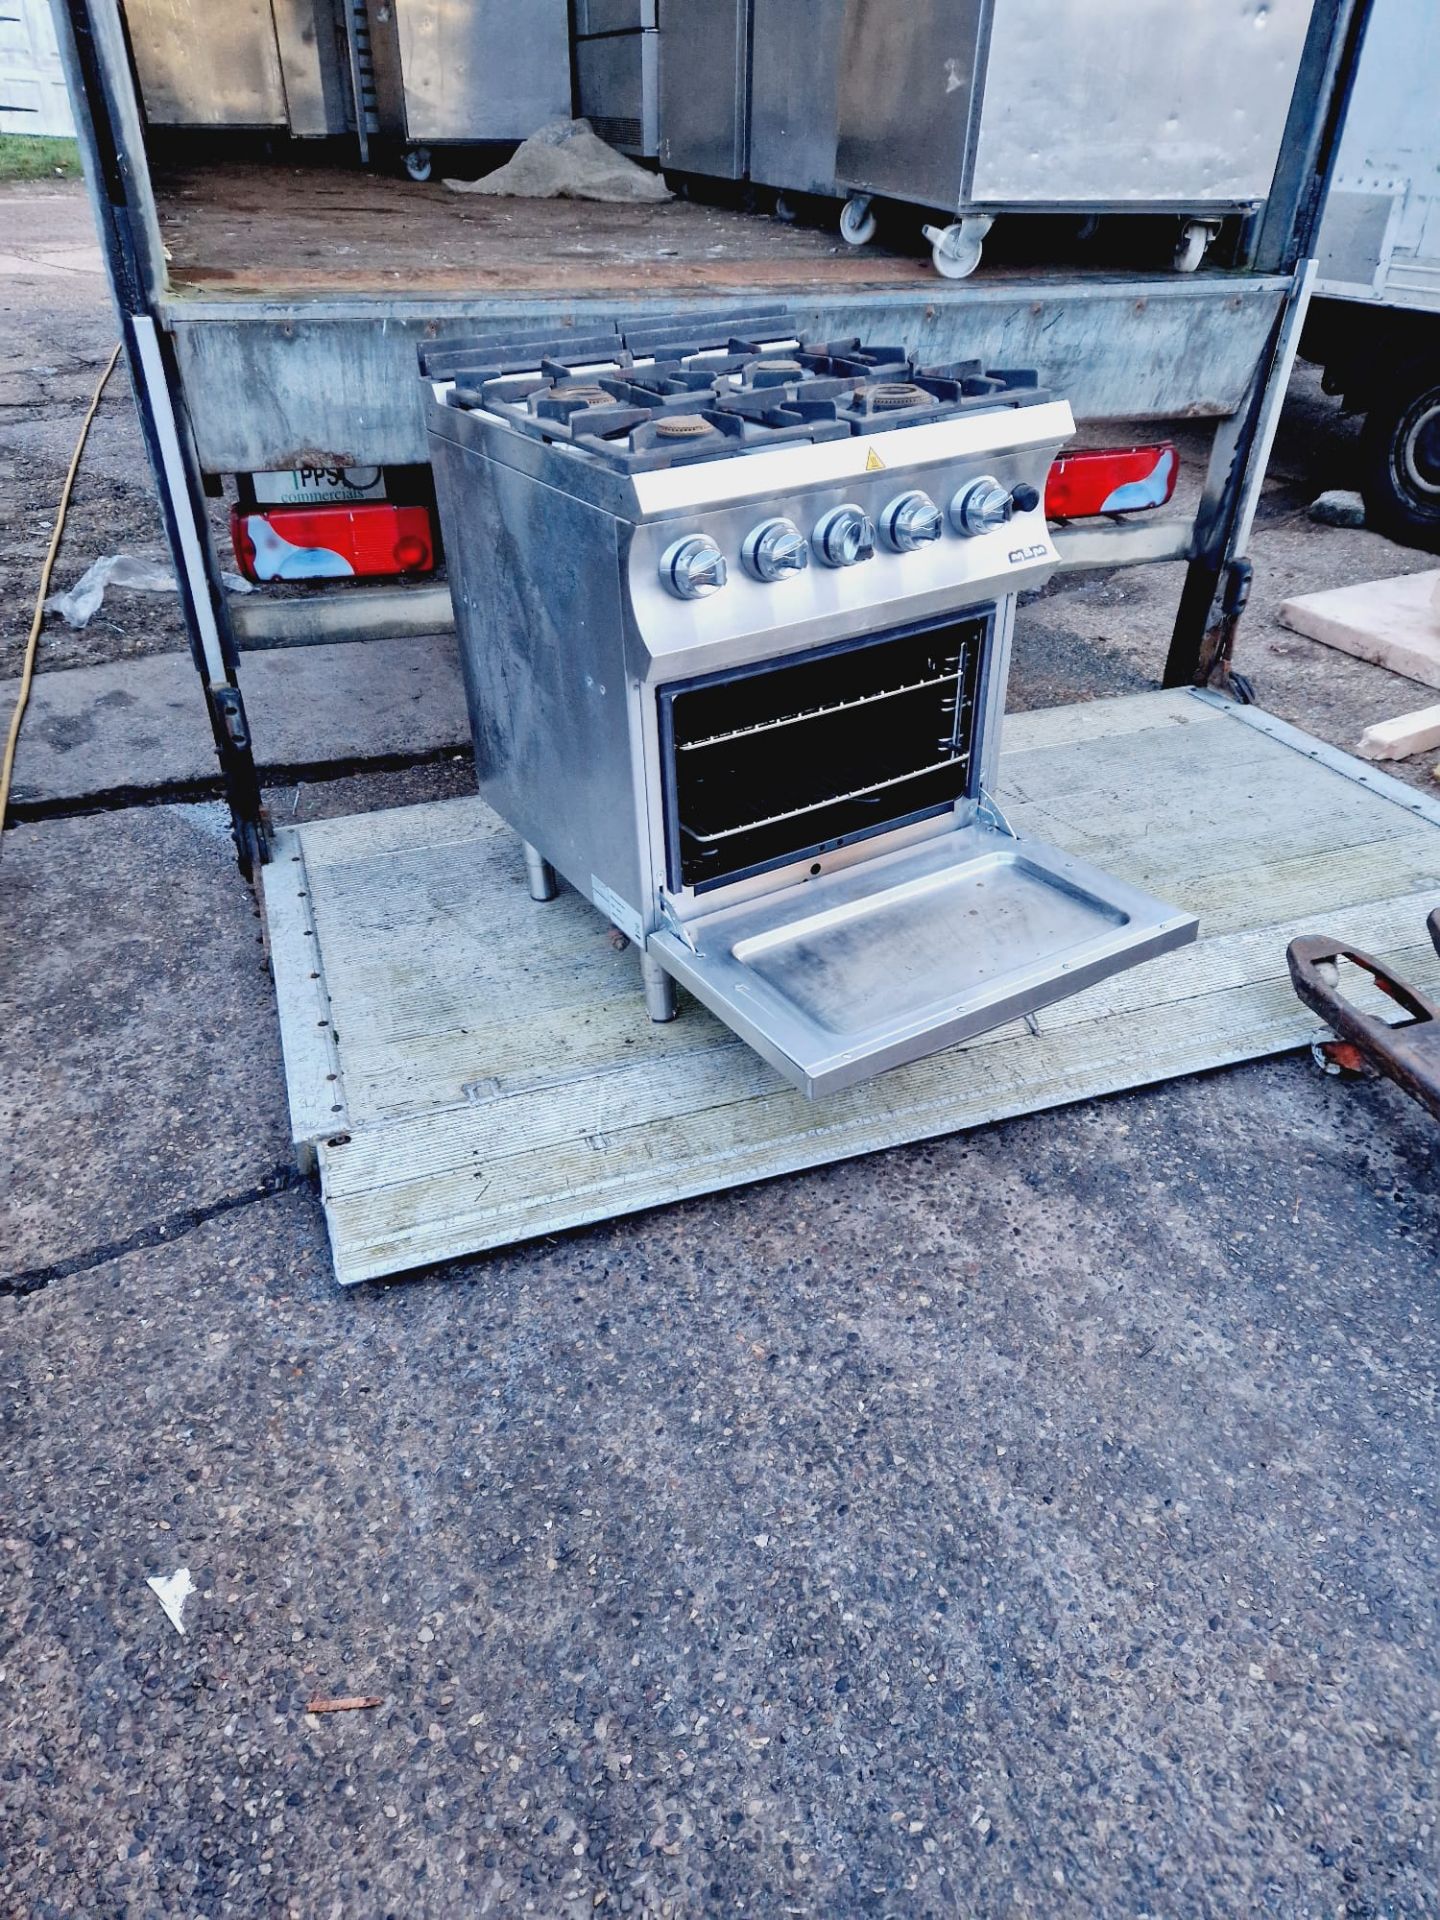 4 BURNER NATURAL GAS COOKER WITH OVEN ALMOST NEW CONDITION - WORKING AND SERVICED  - Image 2 of 4